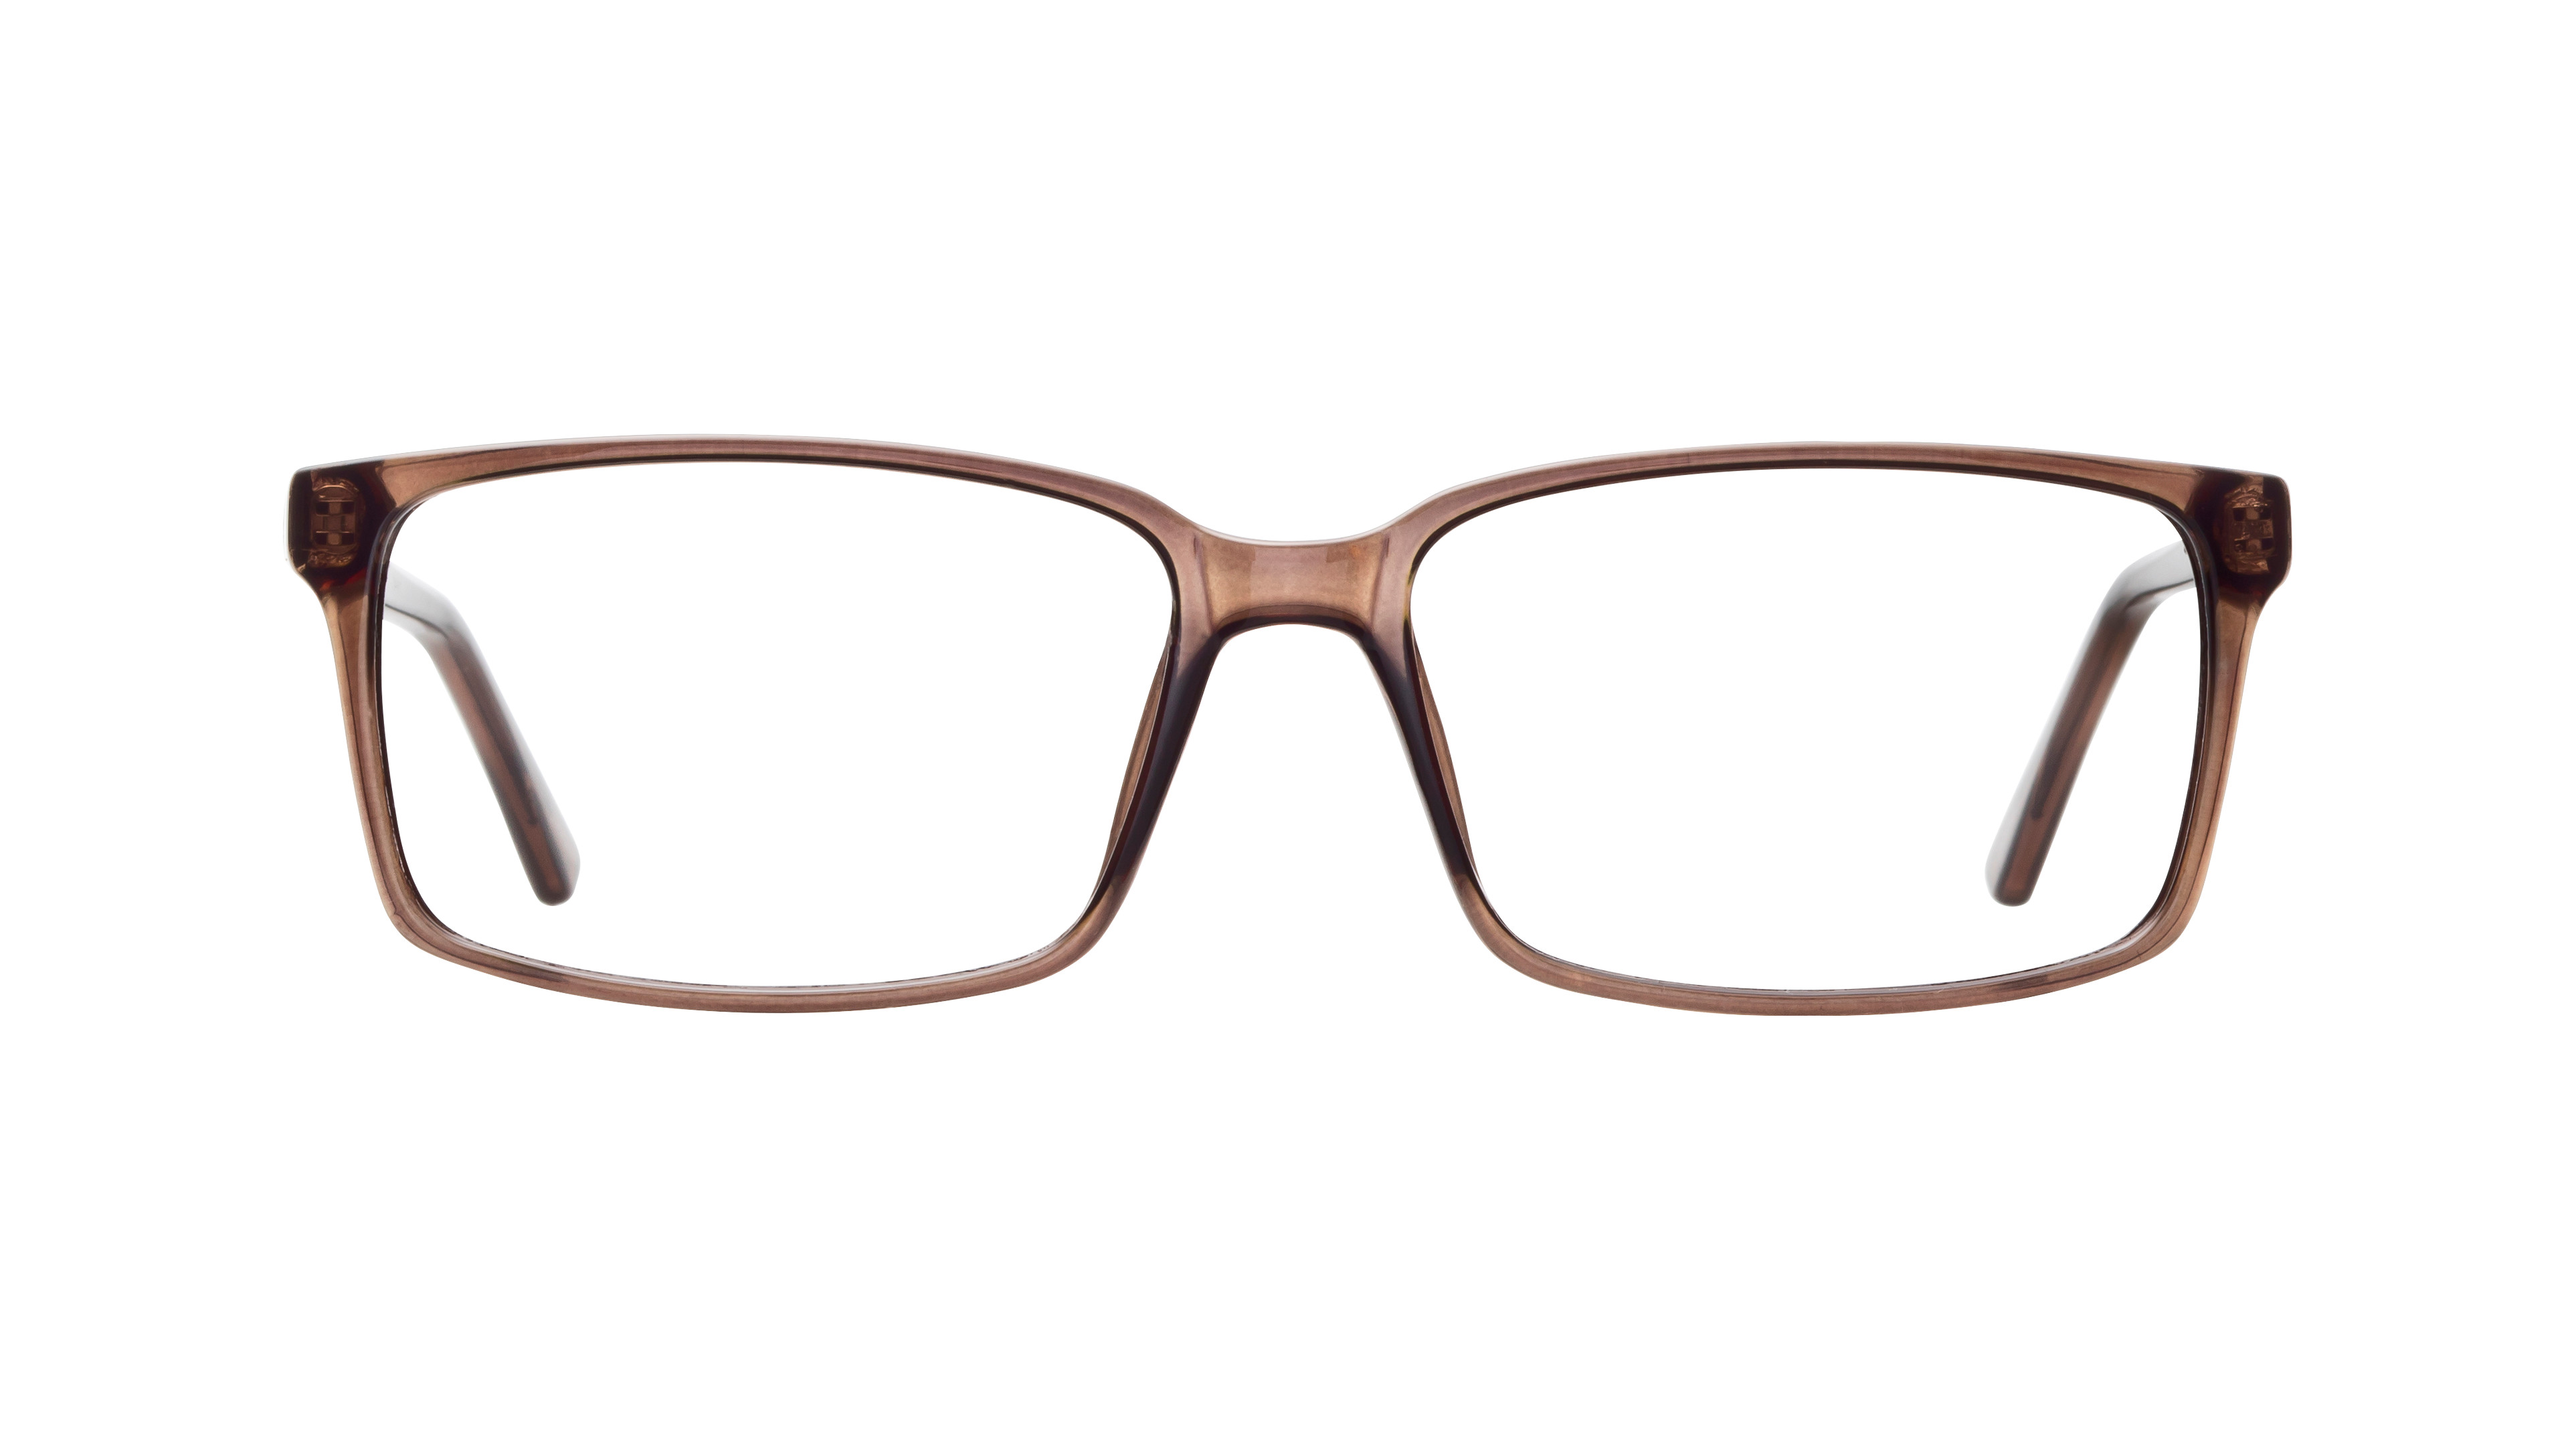 [products.image.front] Seen SNAM21 GG Brille